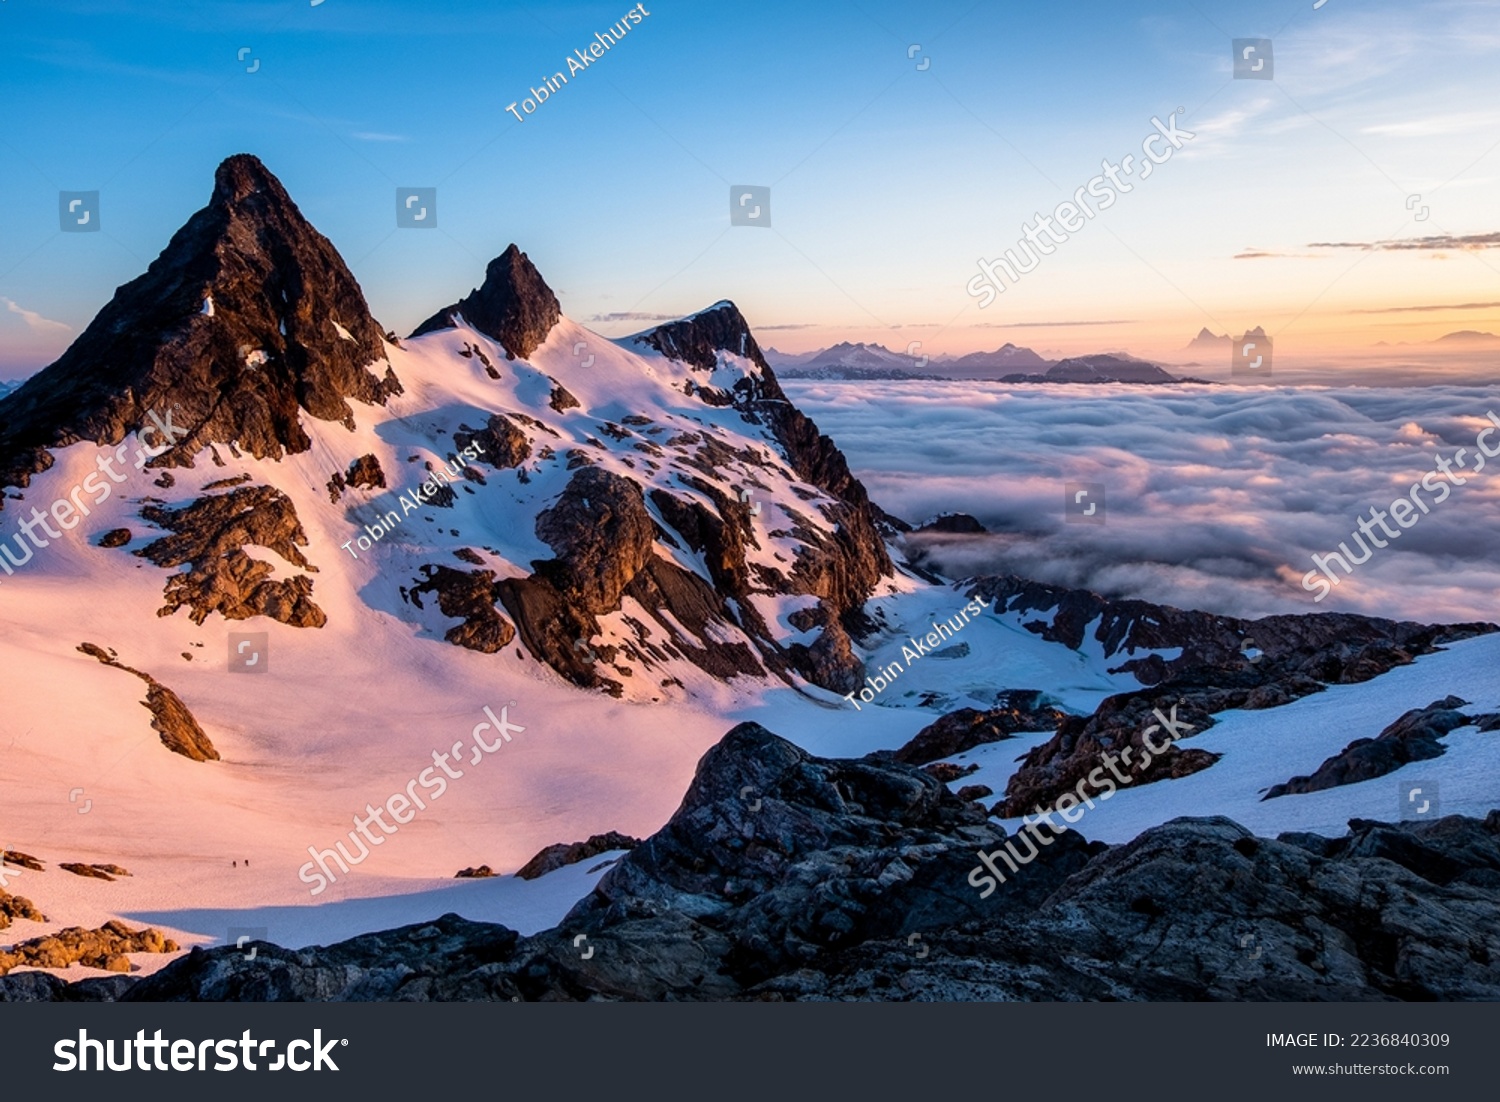 Sunrise Illuminates an Ocean of Clouds and Snowfield Peak as Two Small Climbers Ascend the Glacier Below. 
North Cascades National Park, Washington #2236840309